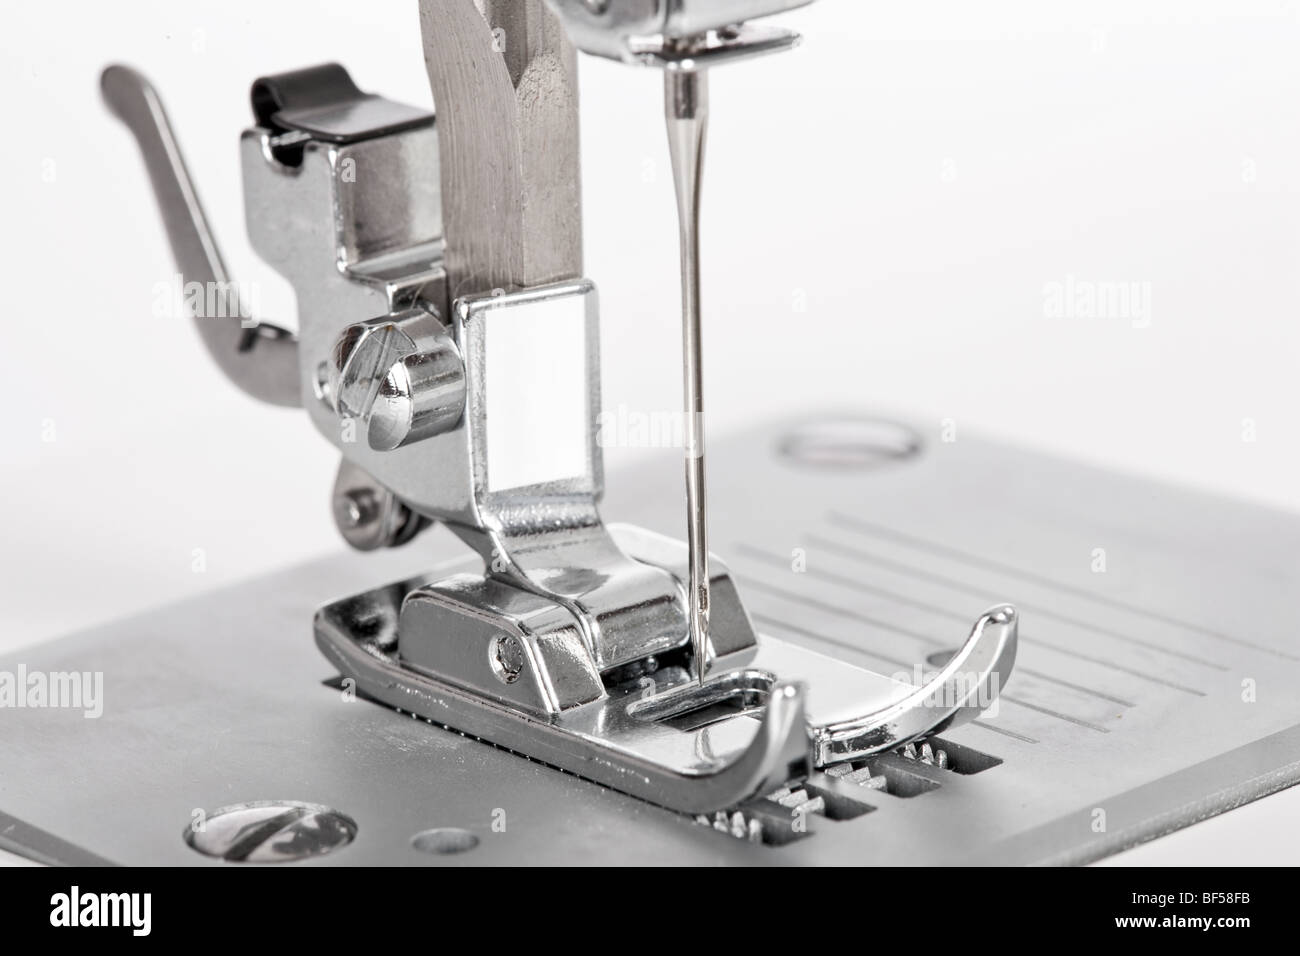 Needle plate, foot and transporter of a sewing machine Stock Photo